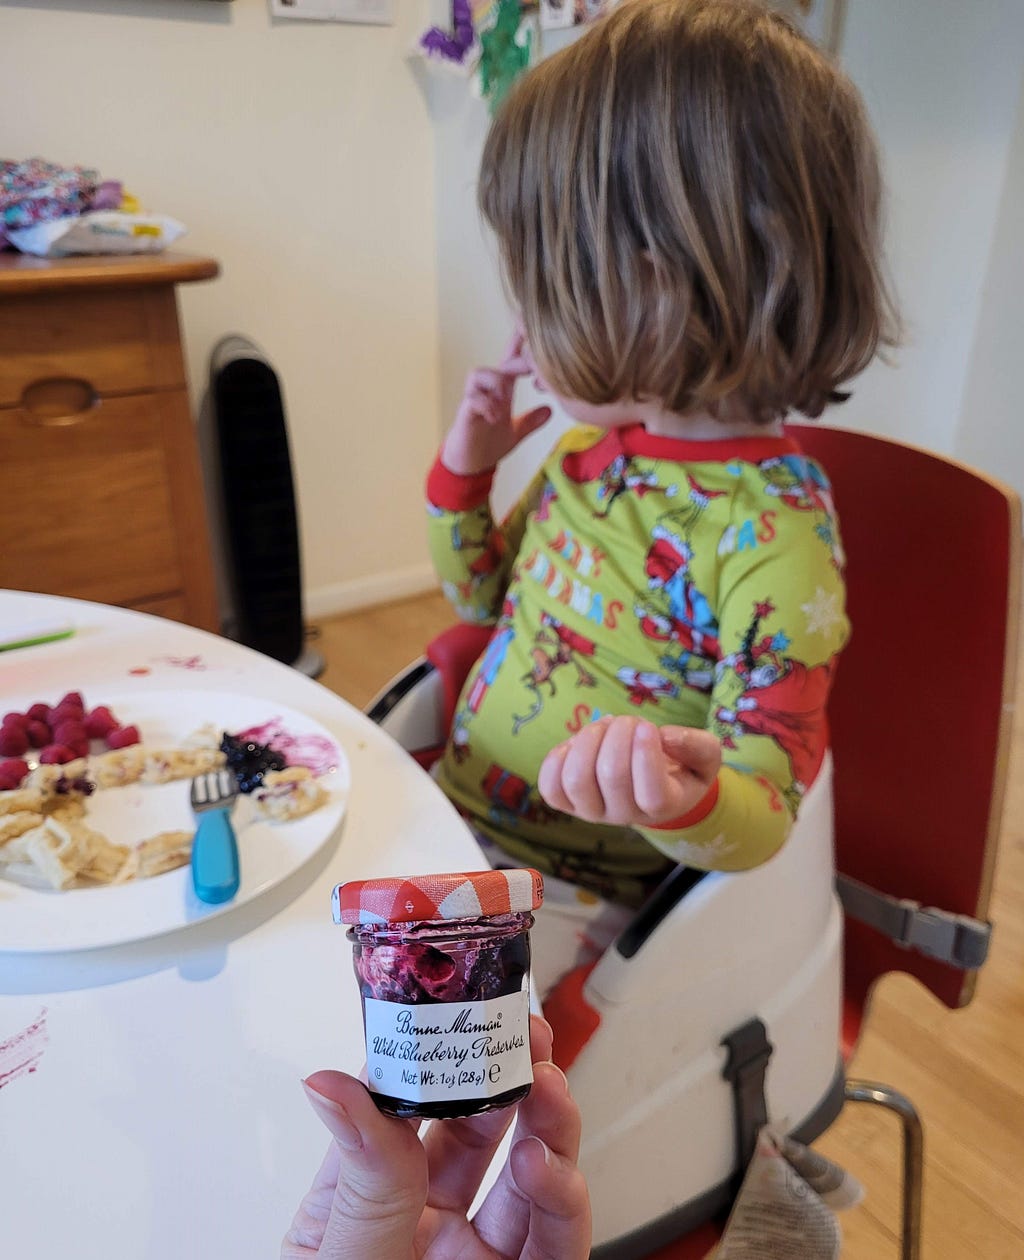 A small child wearing green and red pajamas sits at the table, facing away from the viewer. She has a plate of unfinished waffles and raspberries in front of her. The author holds a tiny jar of jam in the foreground.